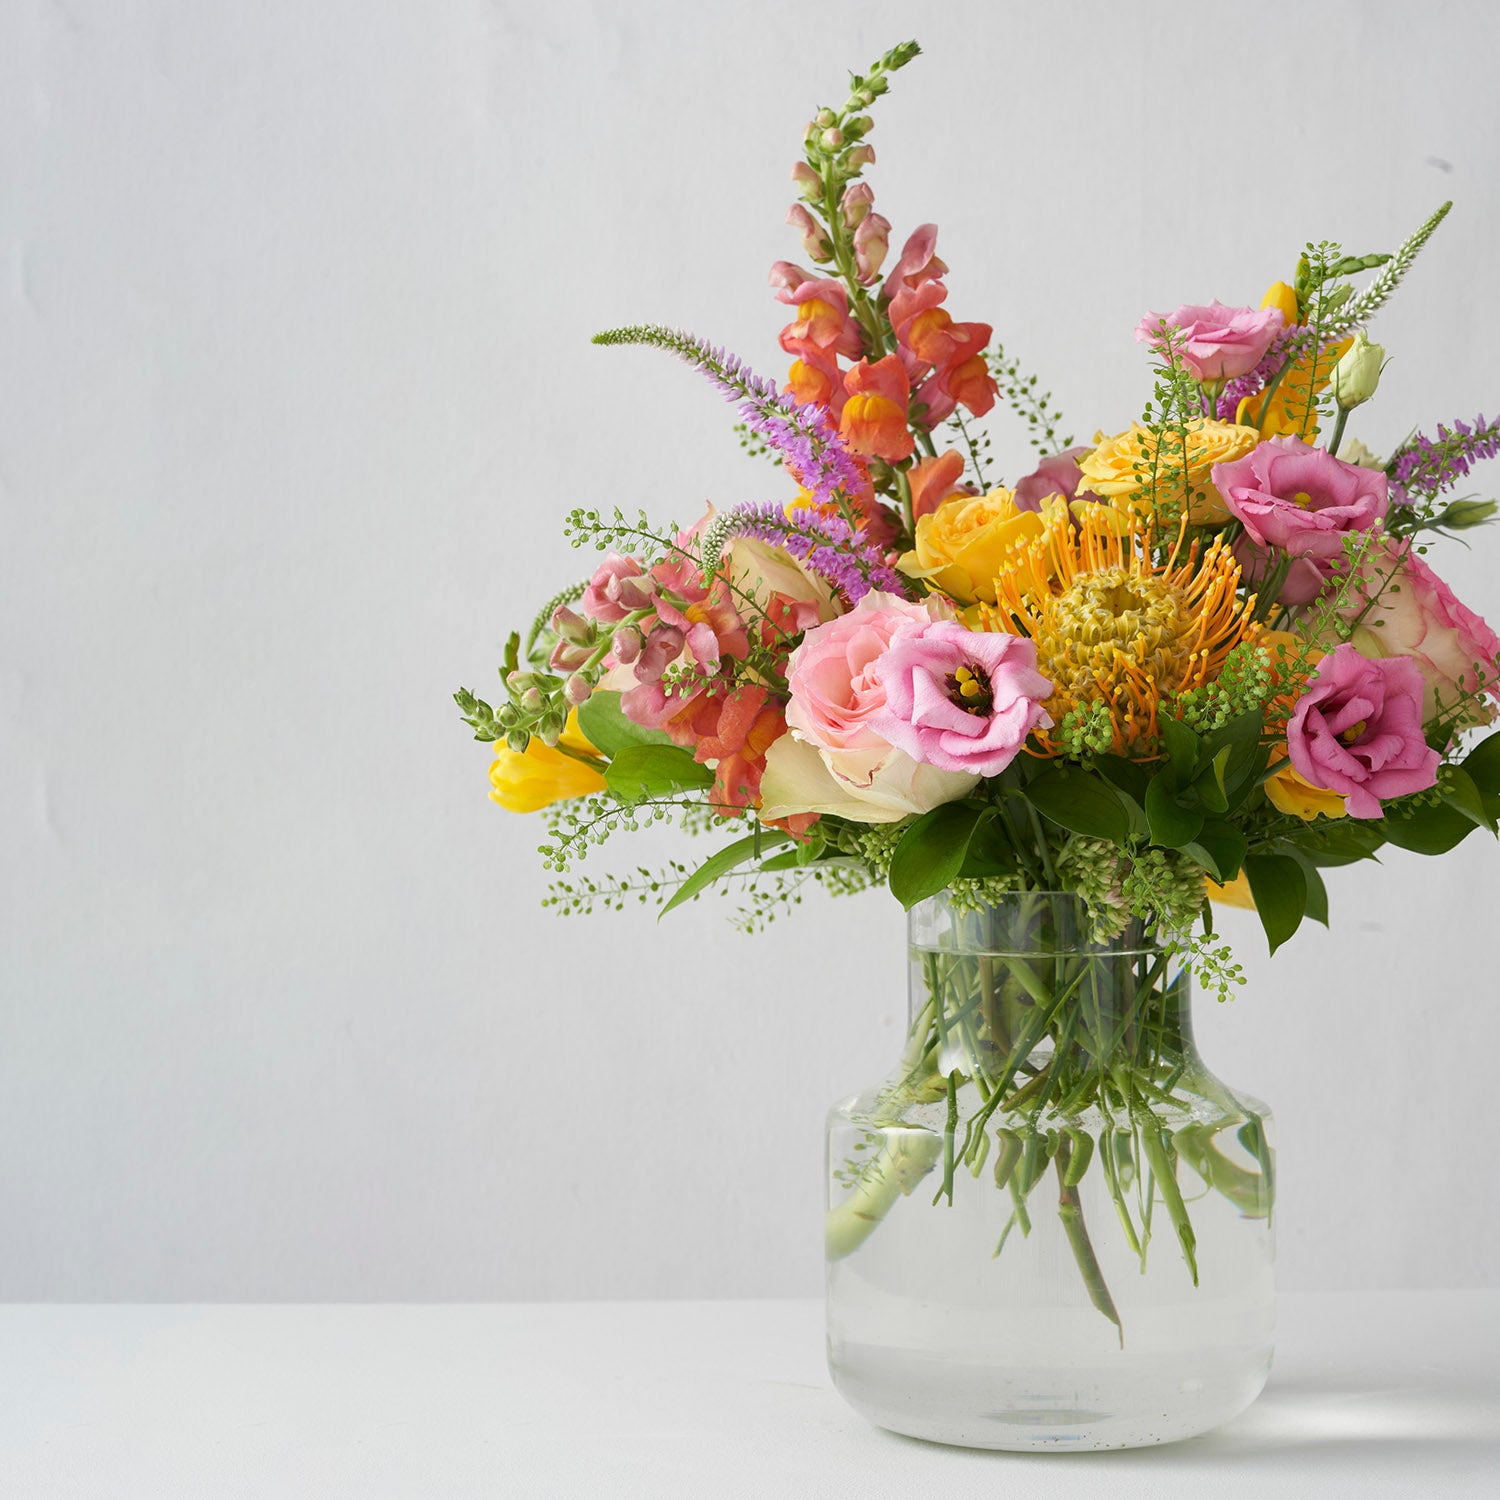 Yellow and pink flowers, arranged in clear glass vase, on white background.